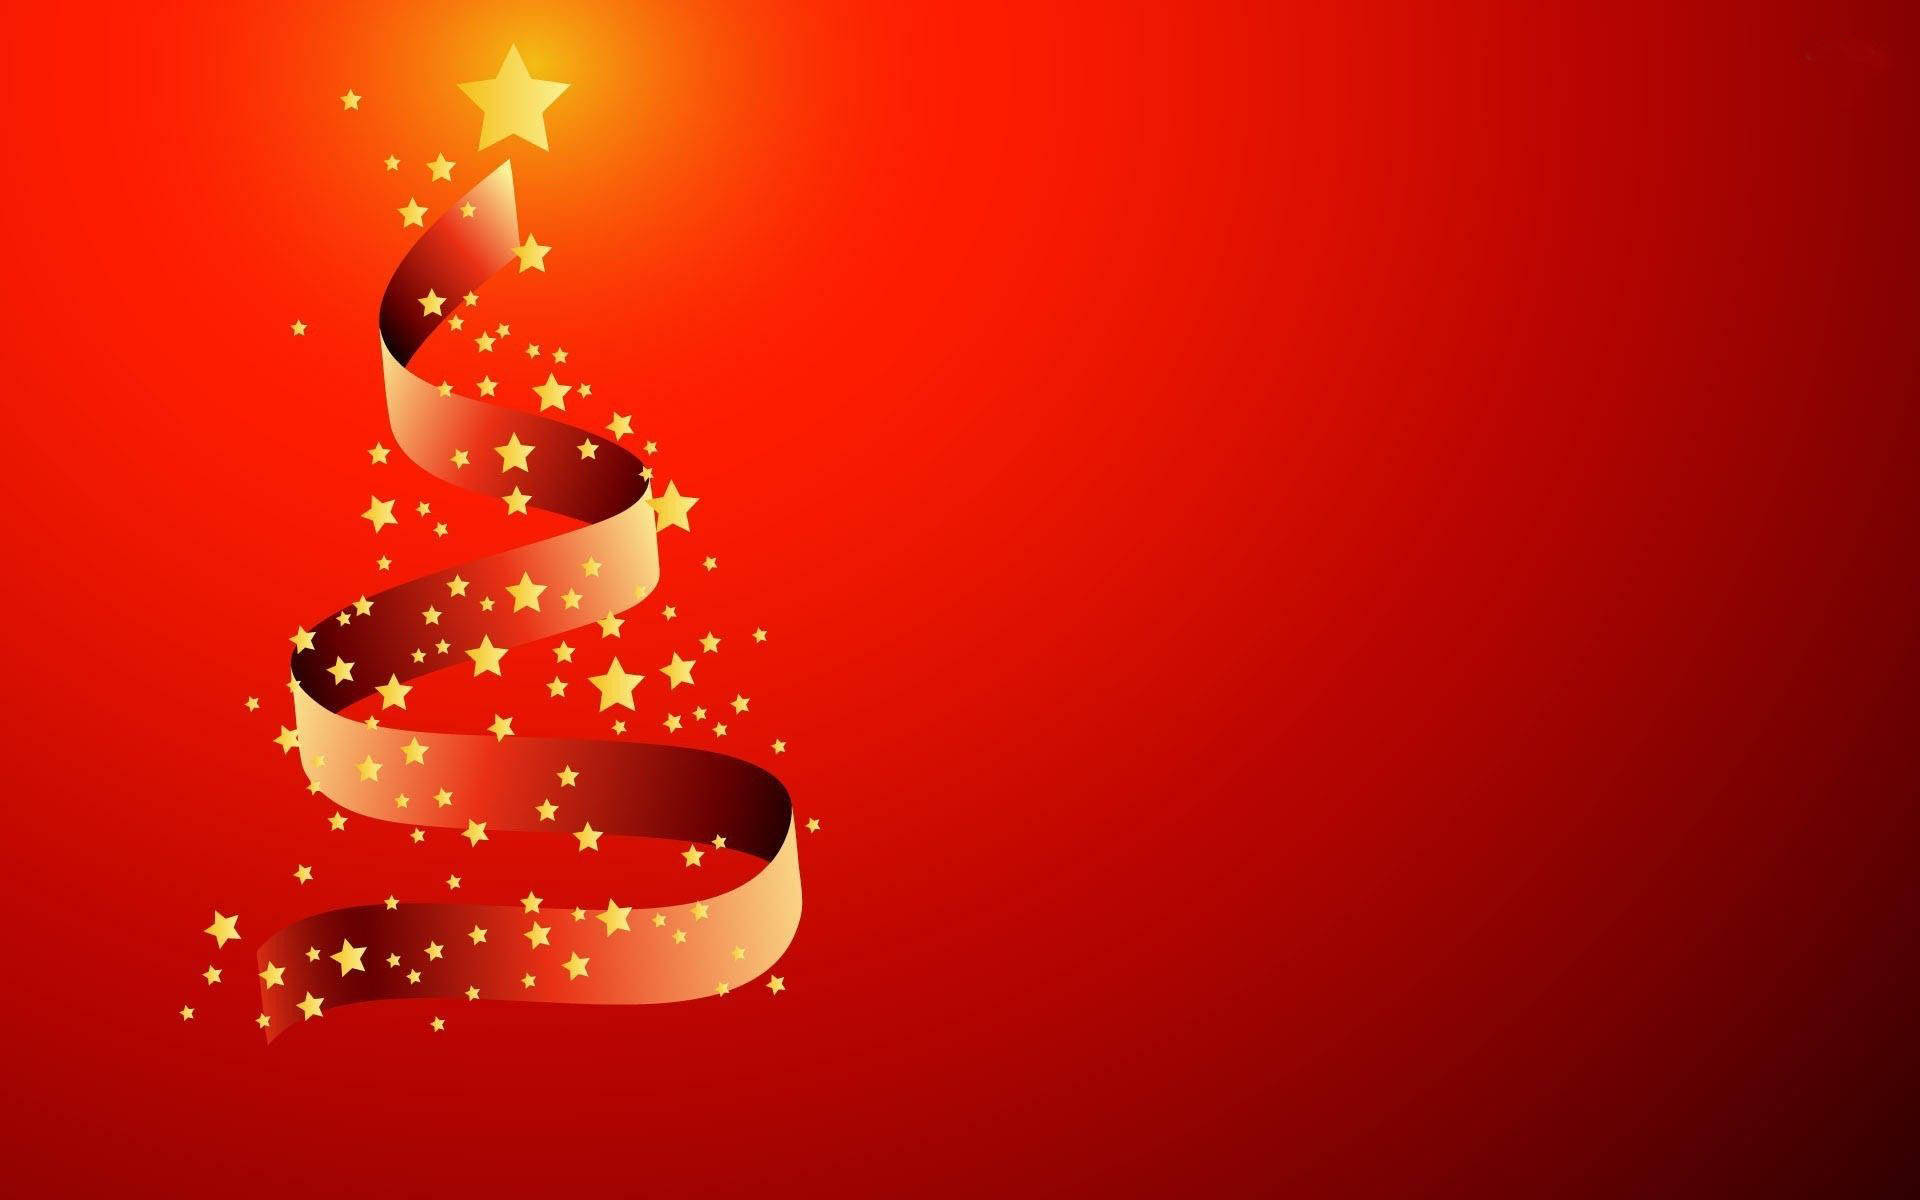 Red And Gold Themed Christmas Background Wallpaper